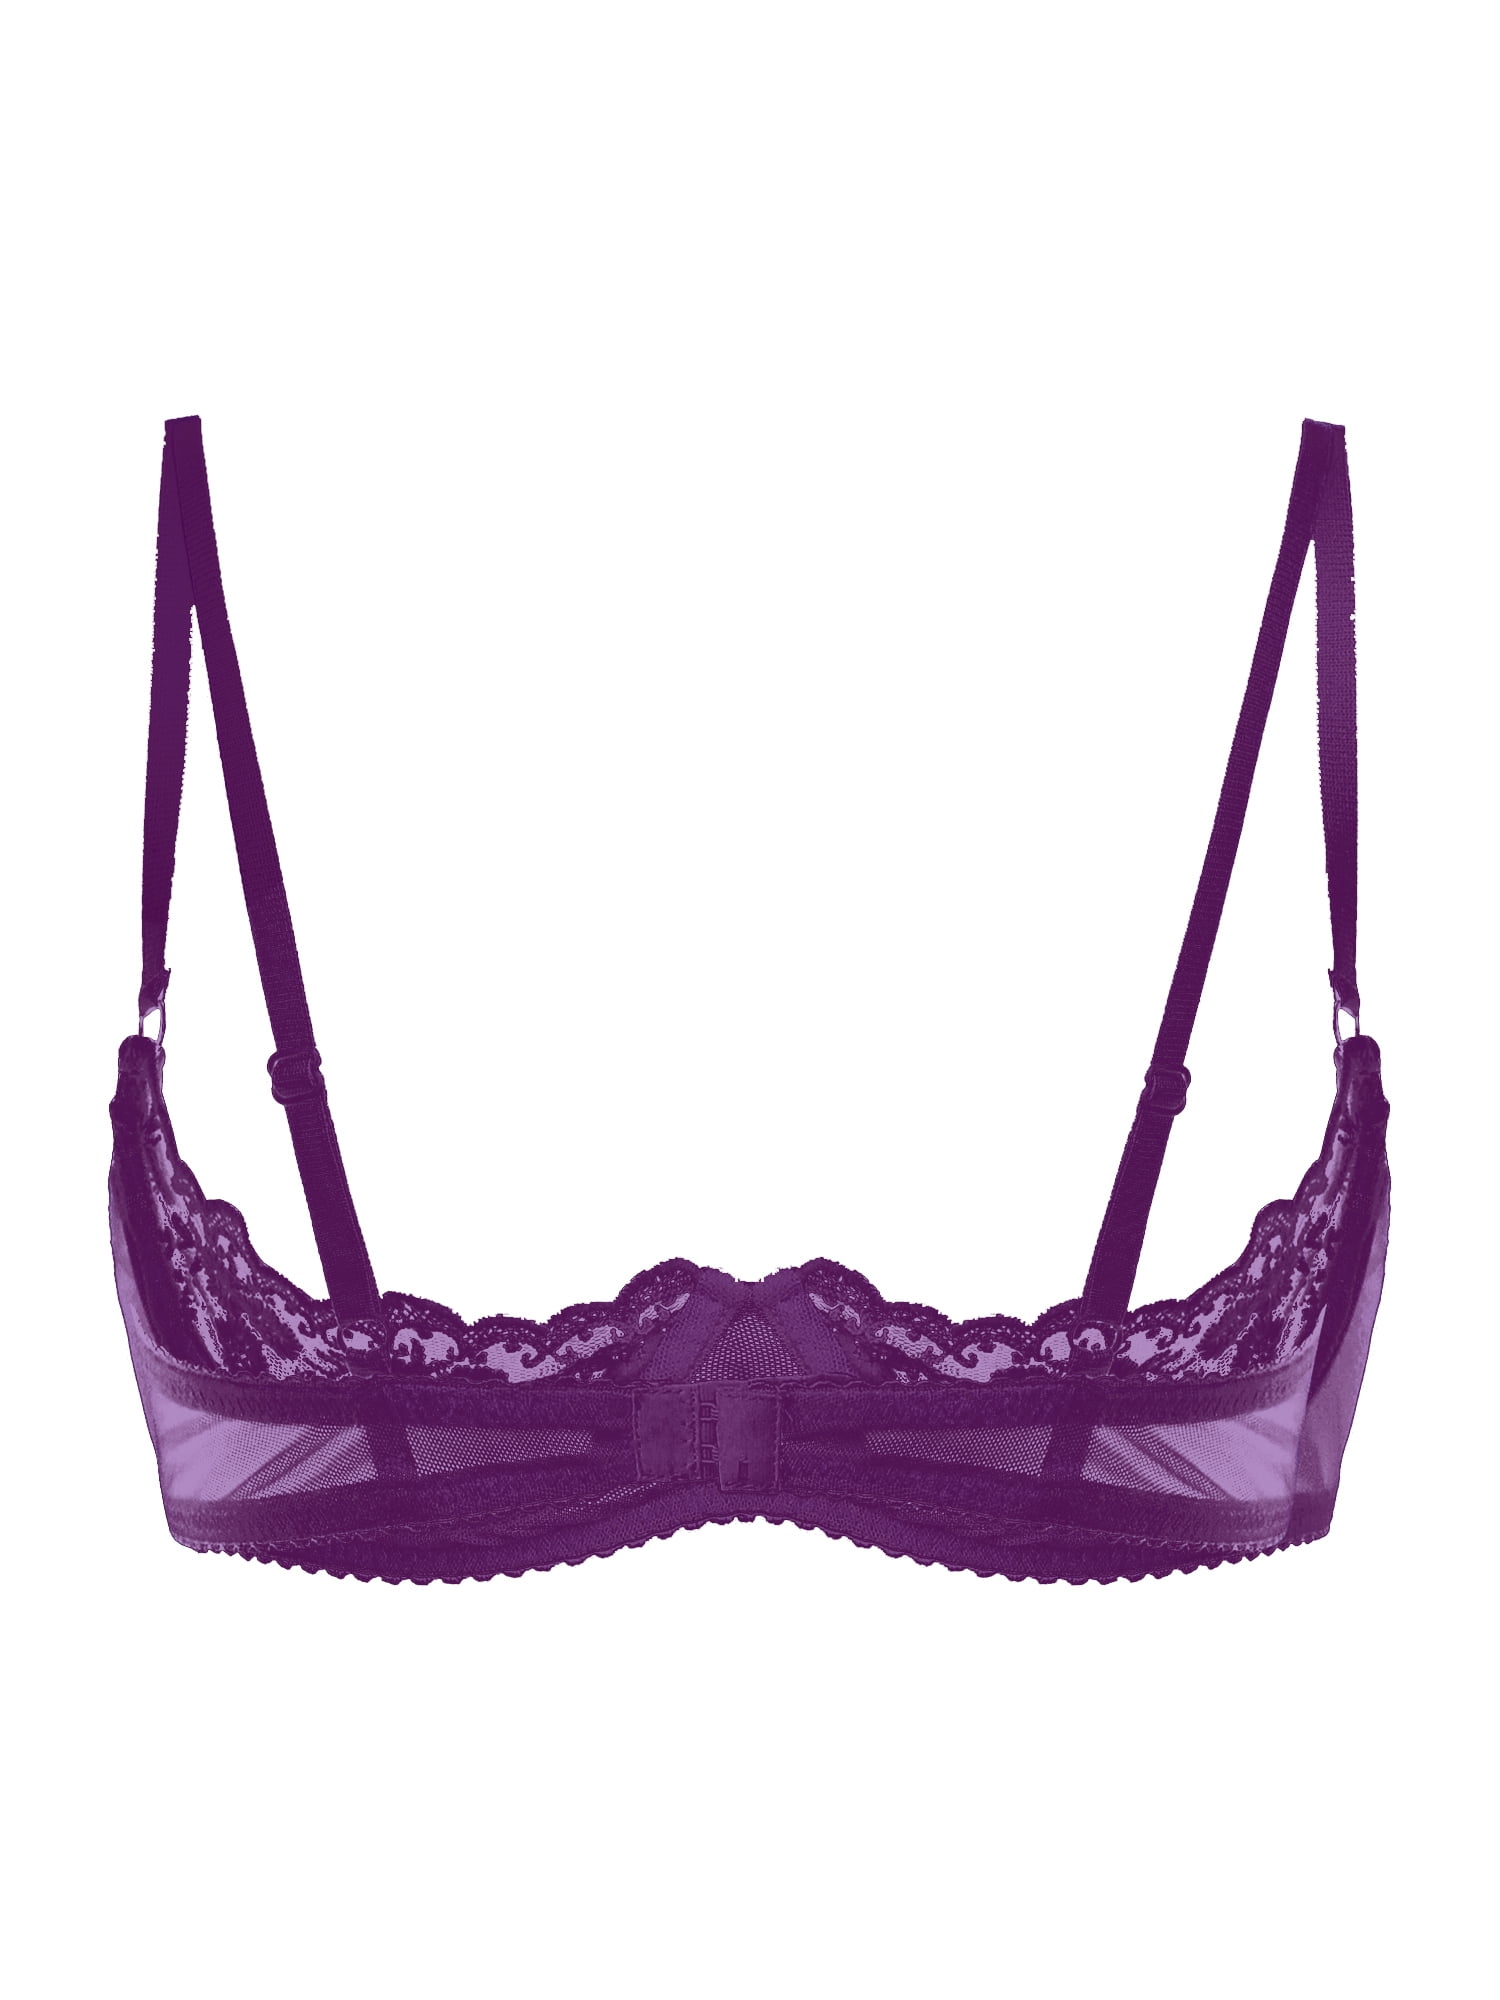 Yeahdor Womens Lace Push Up Underwired Shelf Bra Tops Open Cup Unlined  Bralette Exotic Lingerie Purple-A 3XL 